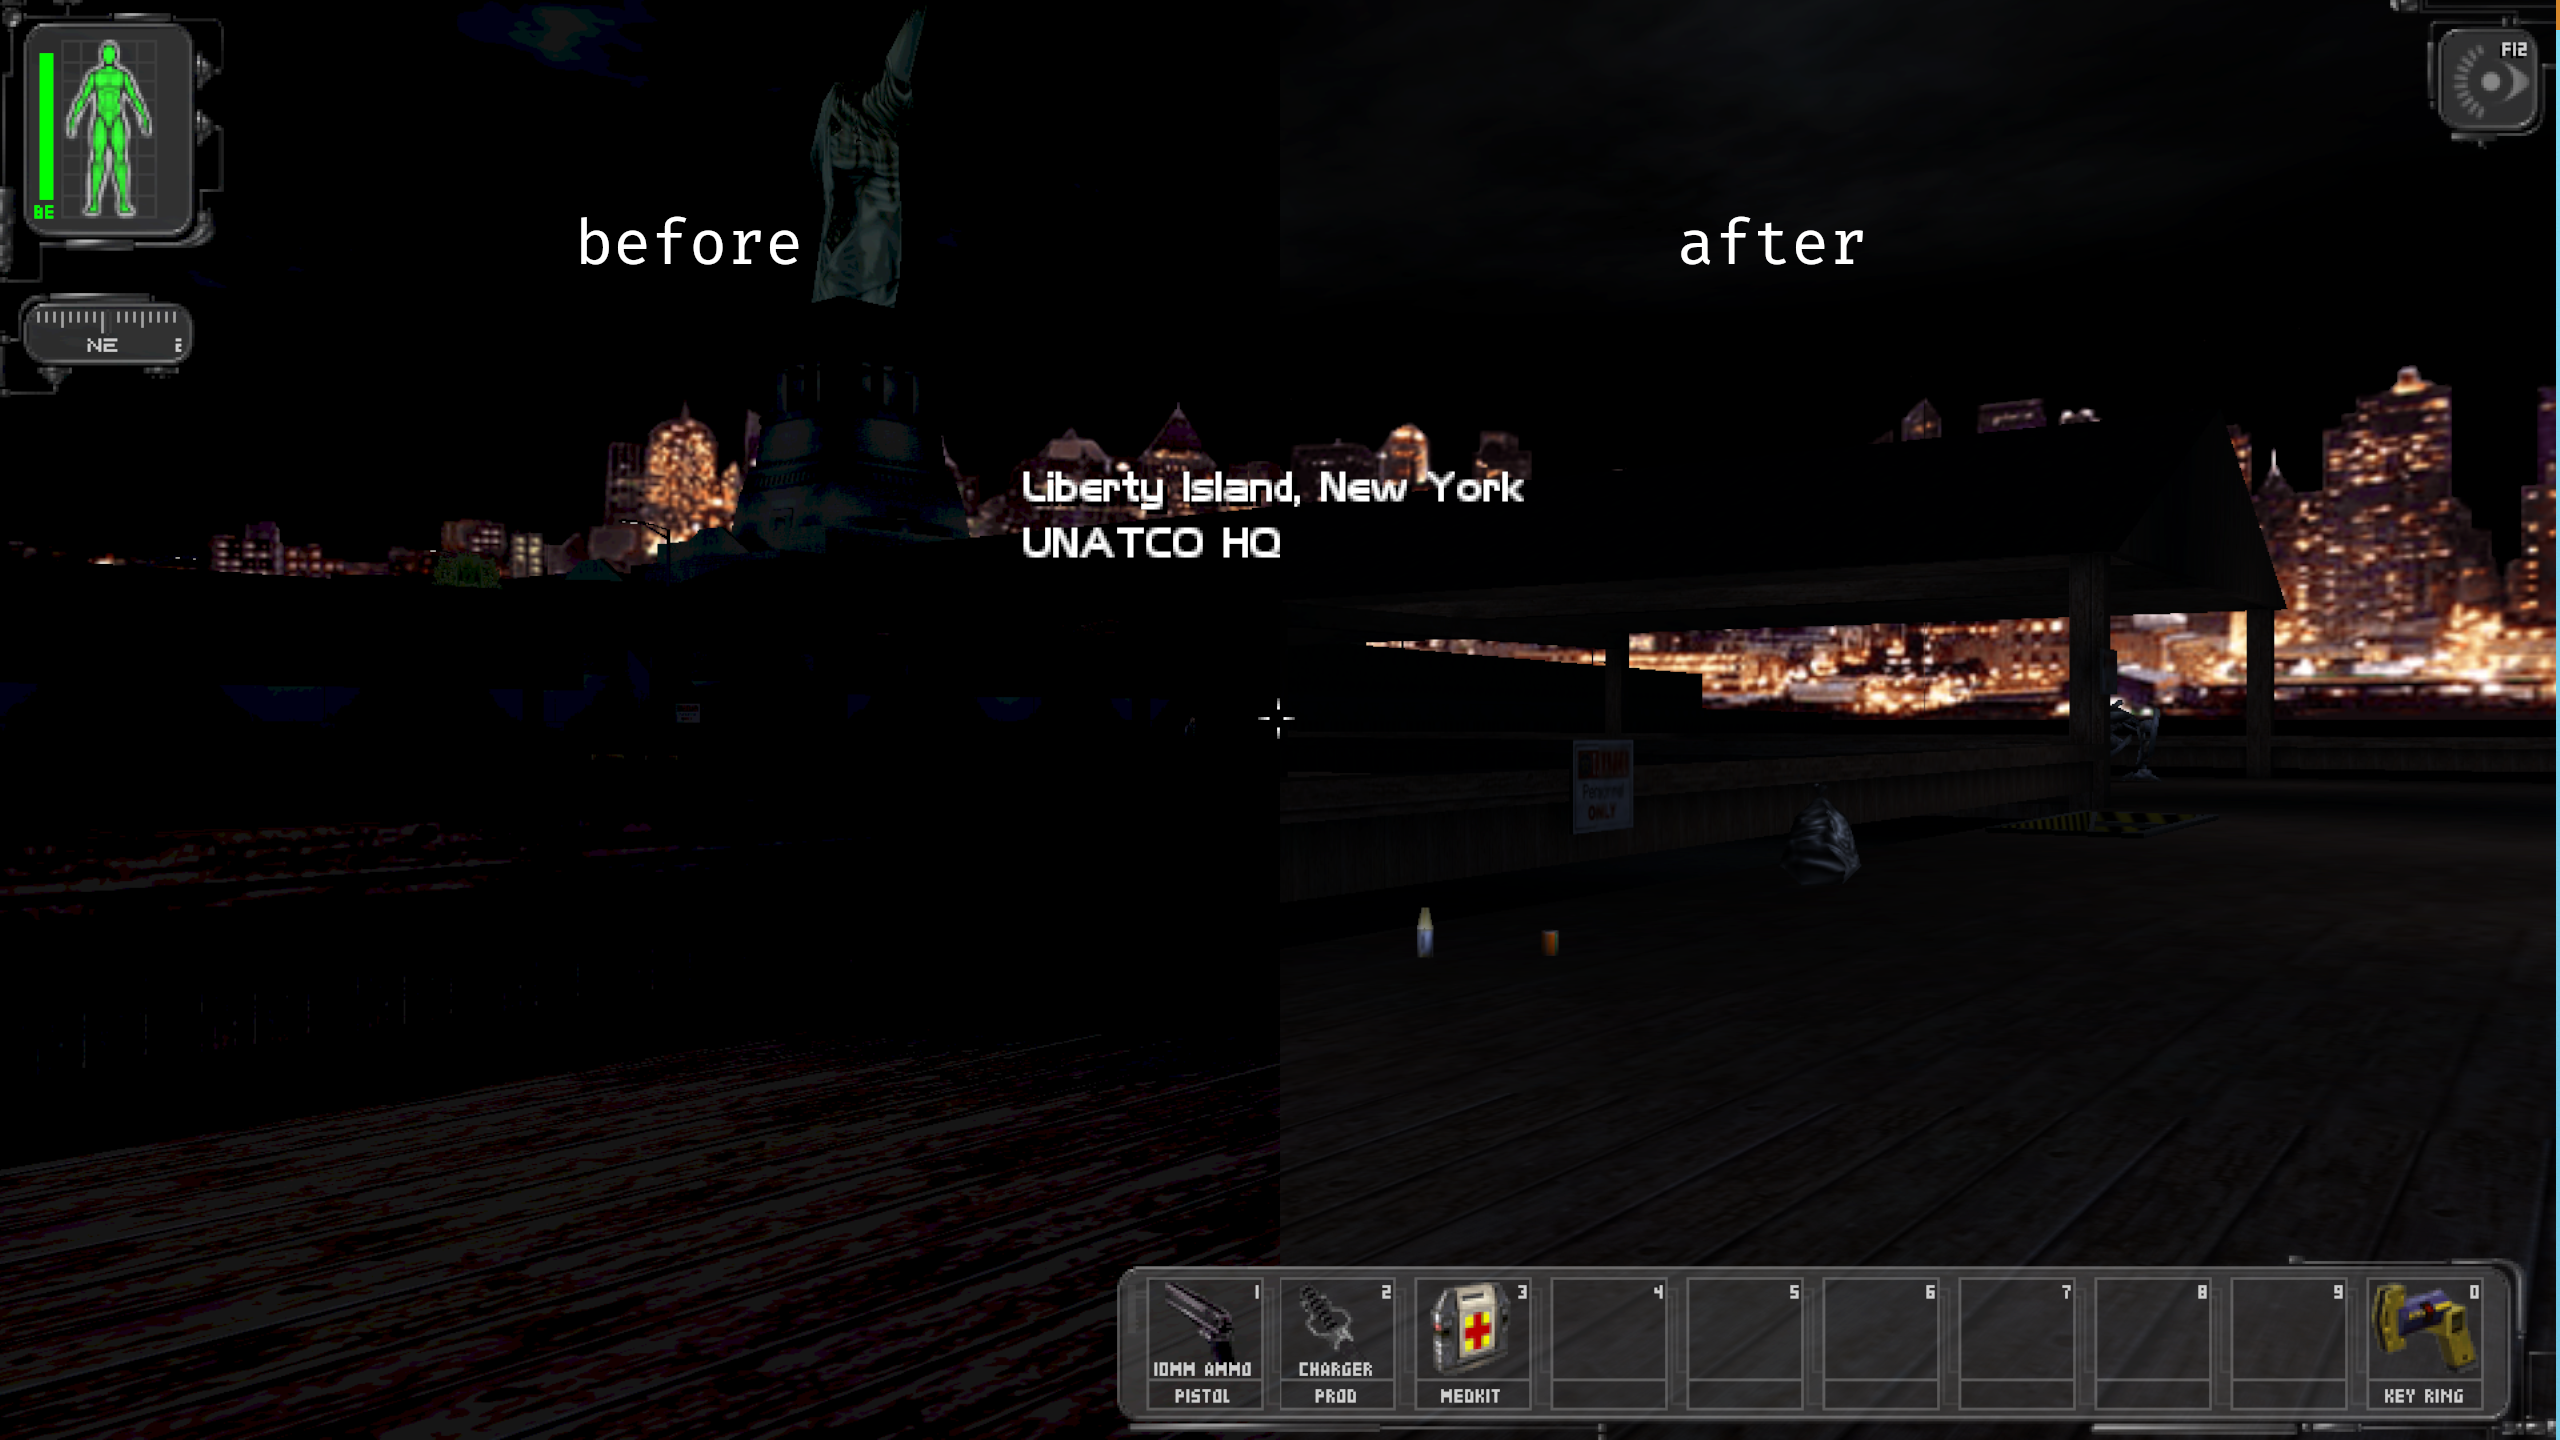 A game screenshot displaying the Statue of Liberty in front of a cityscape. Closer to the player are wooden docks. The image is split down the middle, left side says &ldquo;before&rdquo; and is very dark, the right side says &ldquo;after&rdquo; and is much lighter.